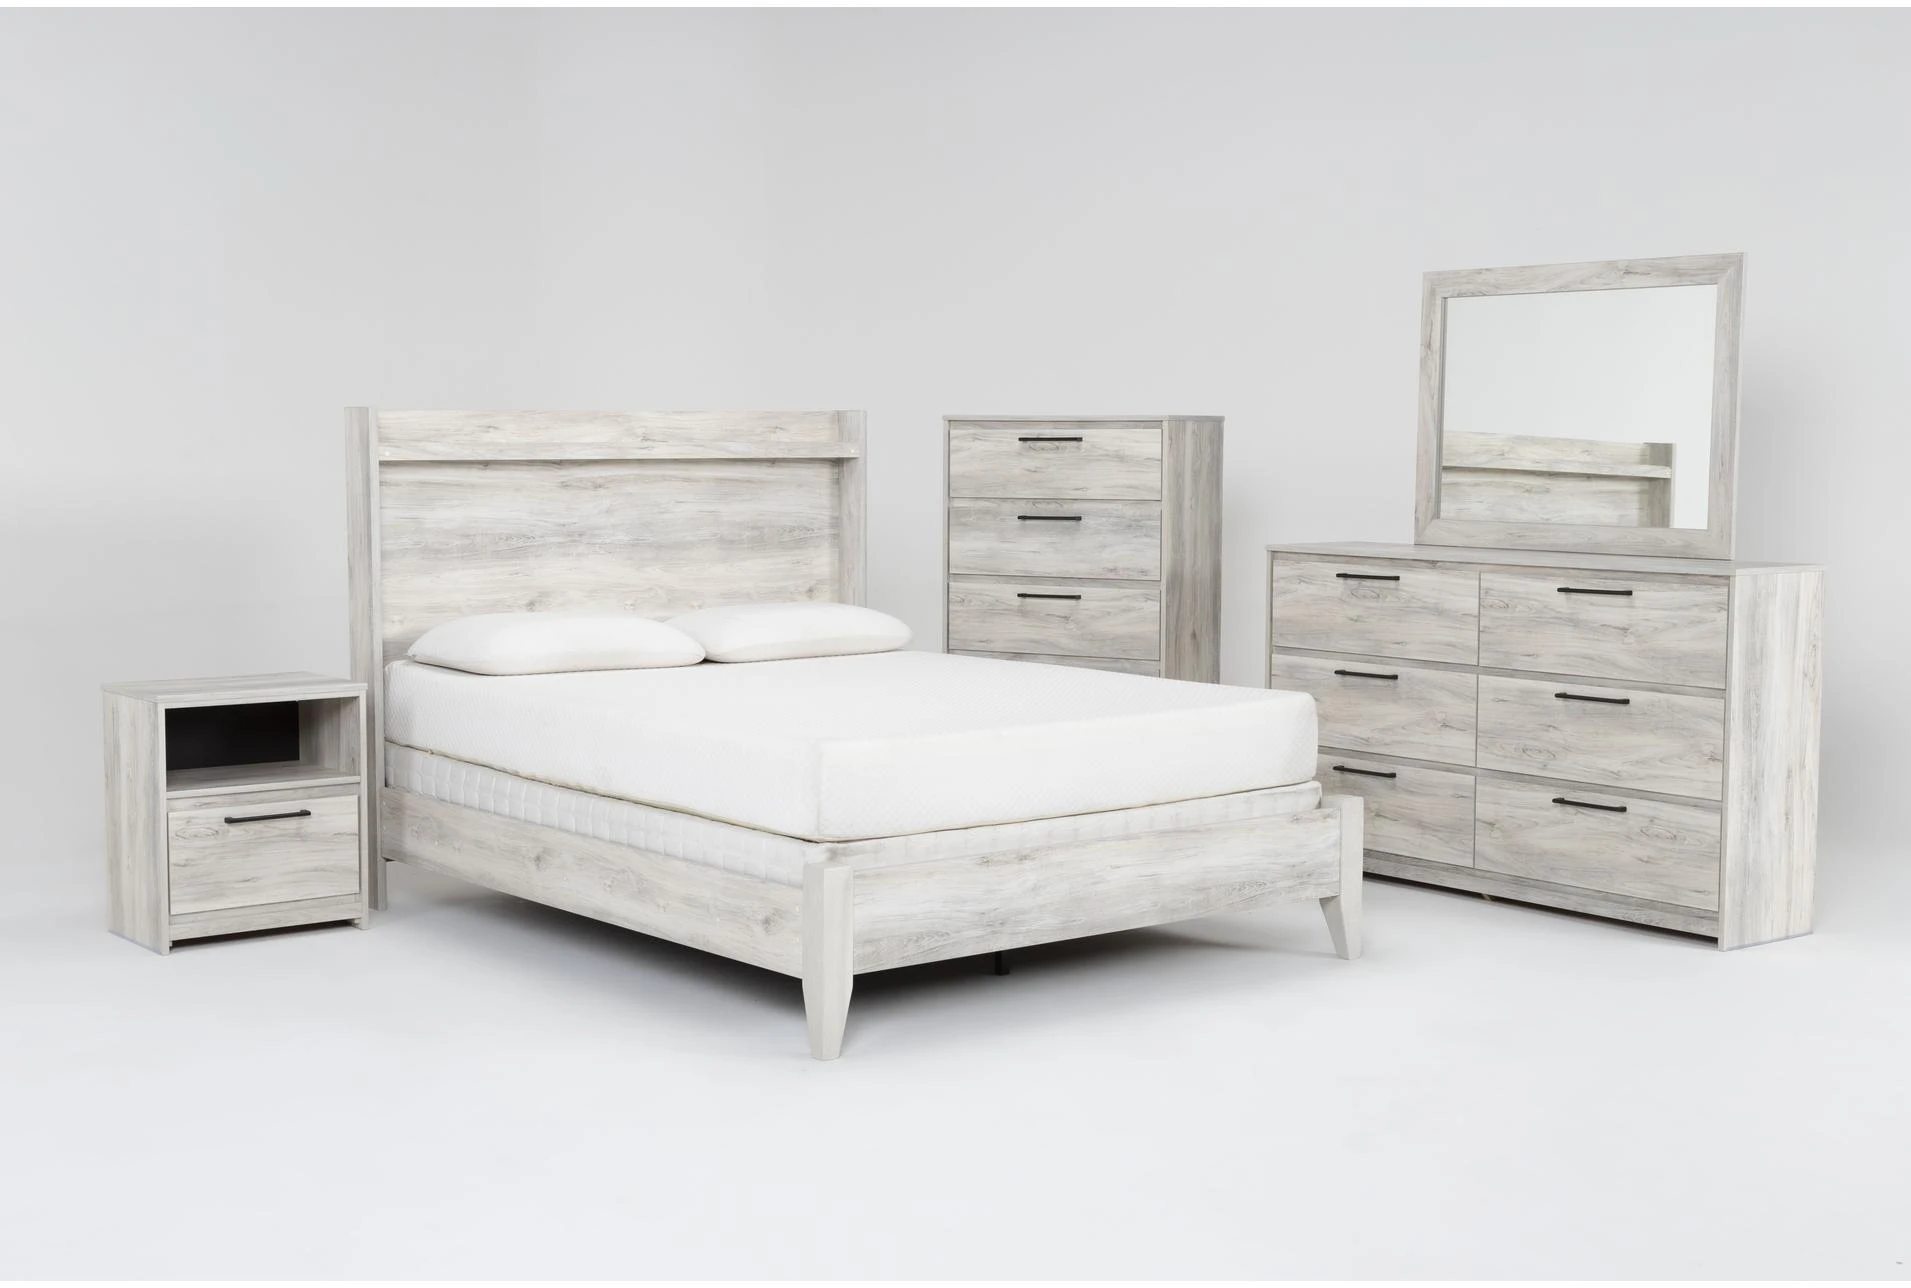 Baylie White King 5 Piece Bedroom Set With Dresser, Mirror, Chest Of ...